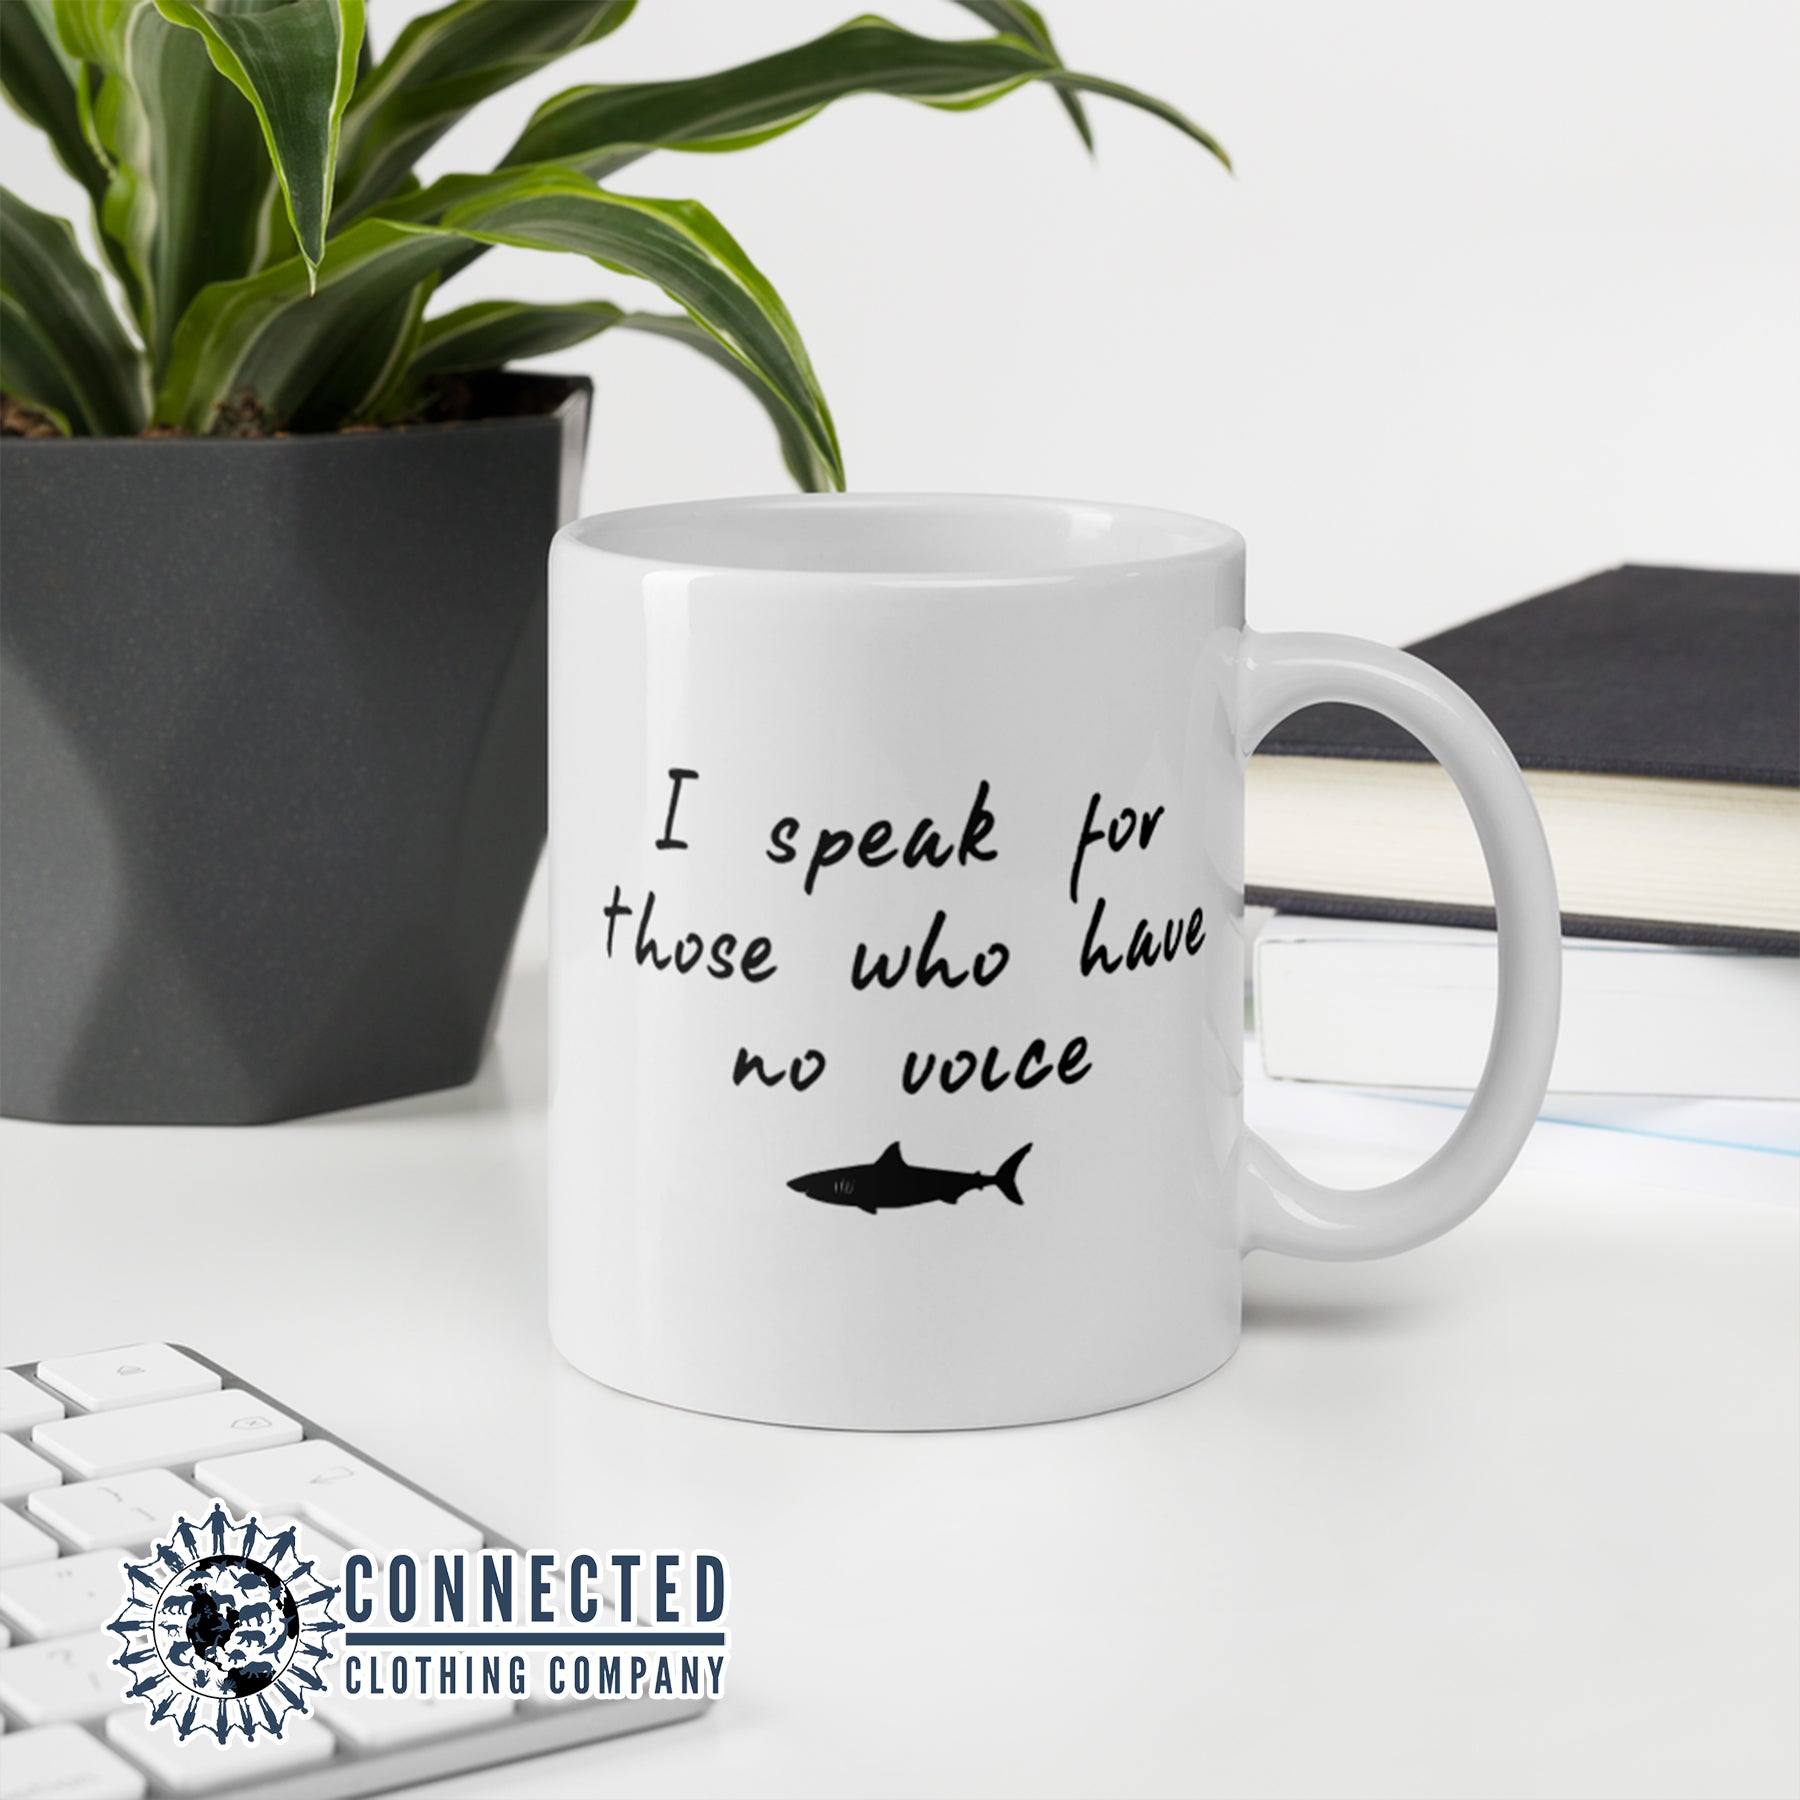 Be The Voice Shark Classic Mug reads "I speak for those who have no voice." - sweetsherriloudesigns - Ethically and Sustainably Made - 10% donated to Oceana shark conservation